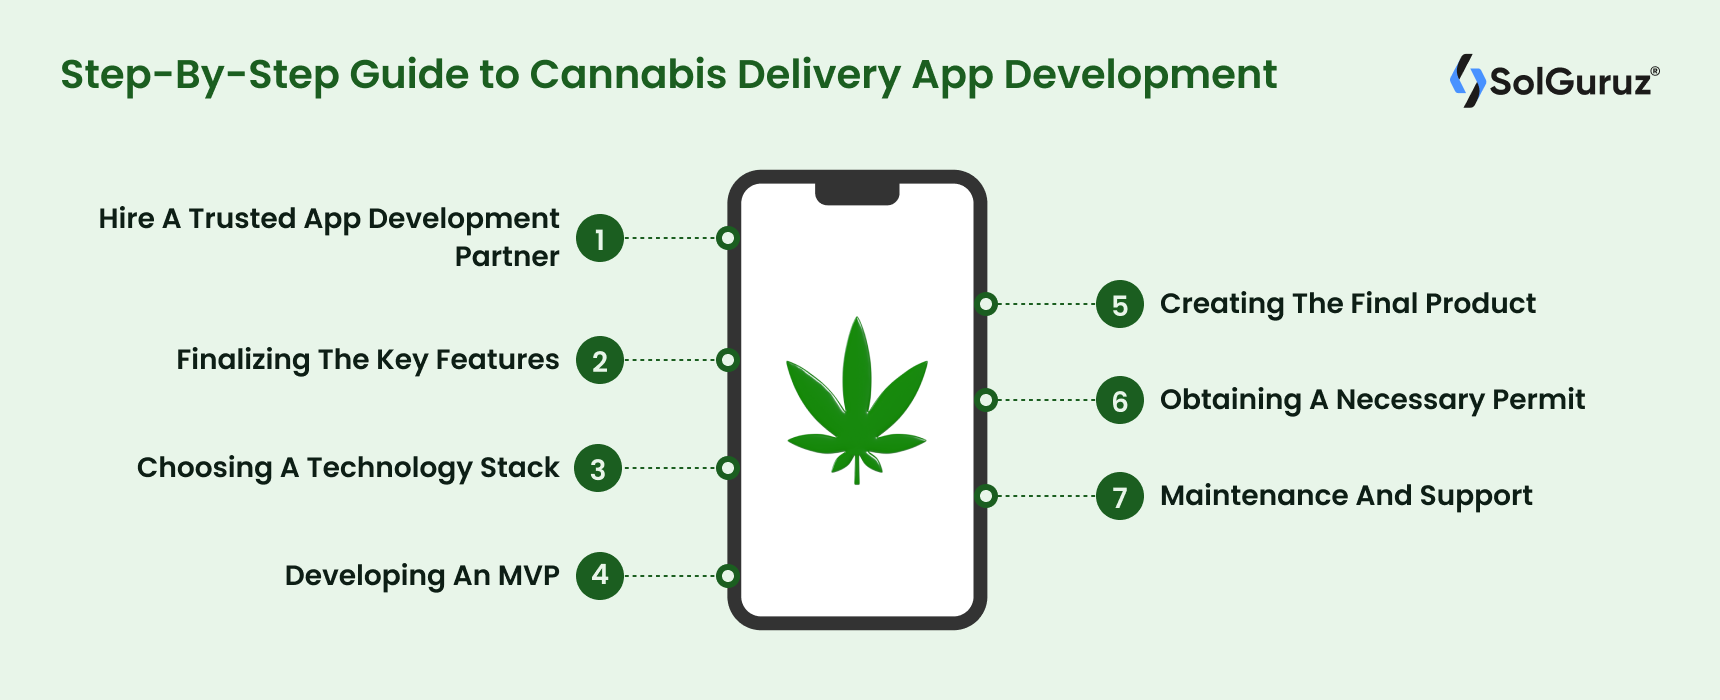 Step-By-Step Guide to Cannabis Delivery App Development